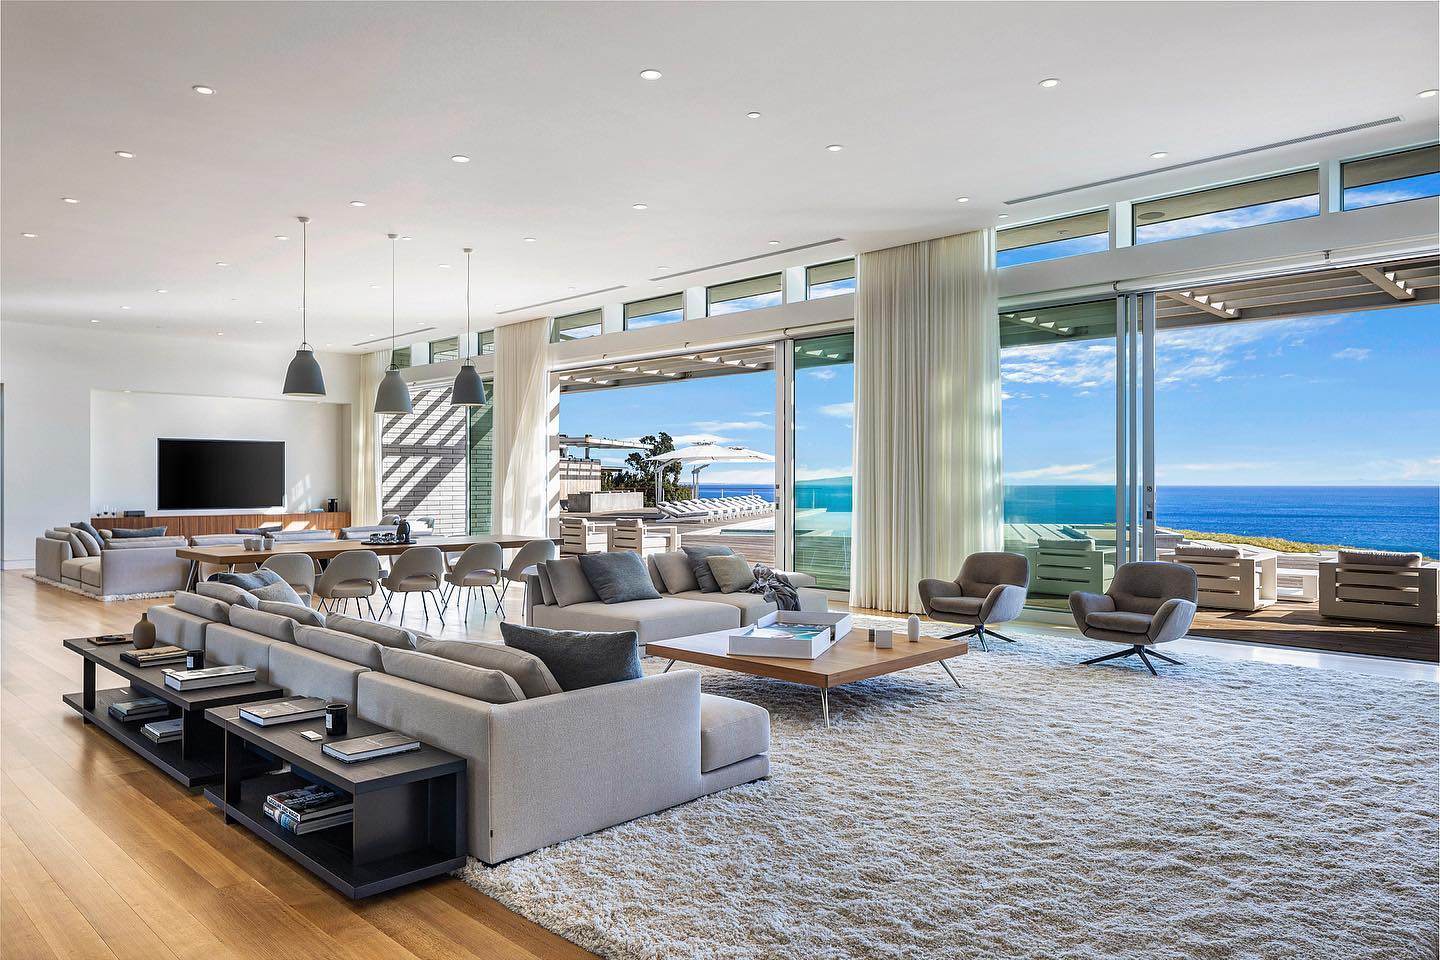 Epic day in Malibu as we come to the finish line on The Edge. Peaceful open space, easy living, and a great vibe. The proportion of the space is extremely important, it allows you to be intimate within the room, and still gives you distance. The synergy, the proportion and the welcoming is what we call the totality. #scottgillendesign #thecase #private #theedge